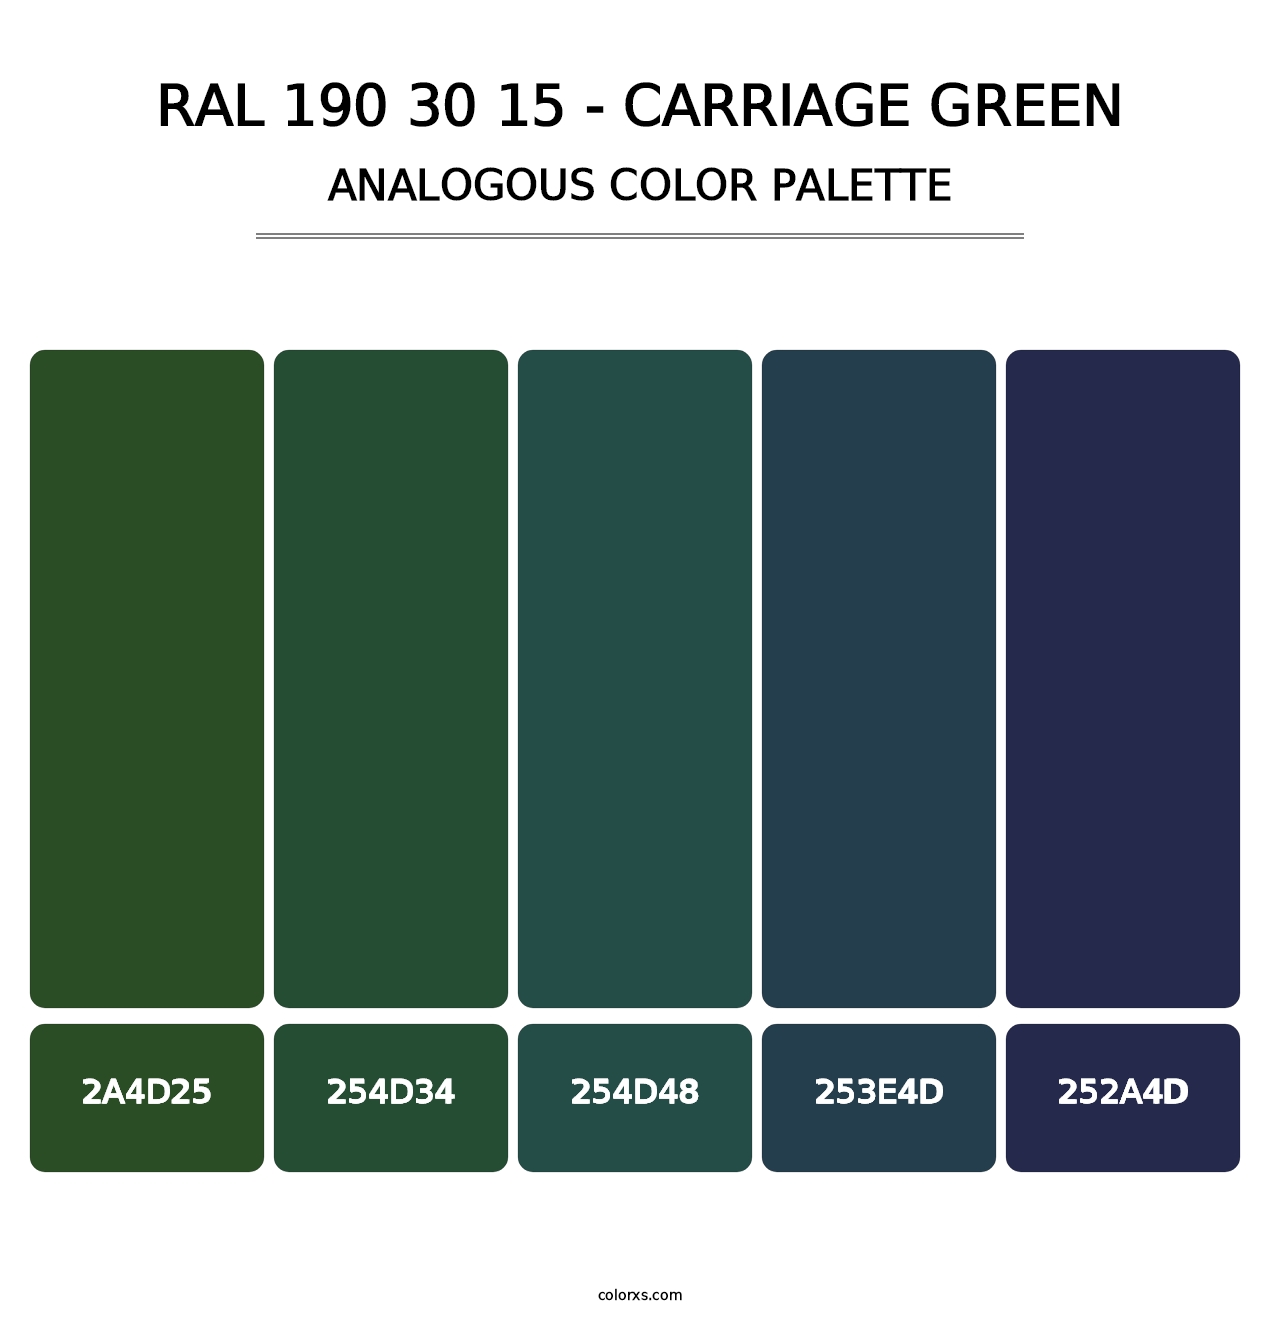 RAL 190 30 15 - Carriage Green - Analogous Color Palette